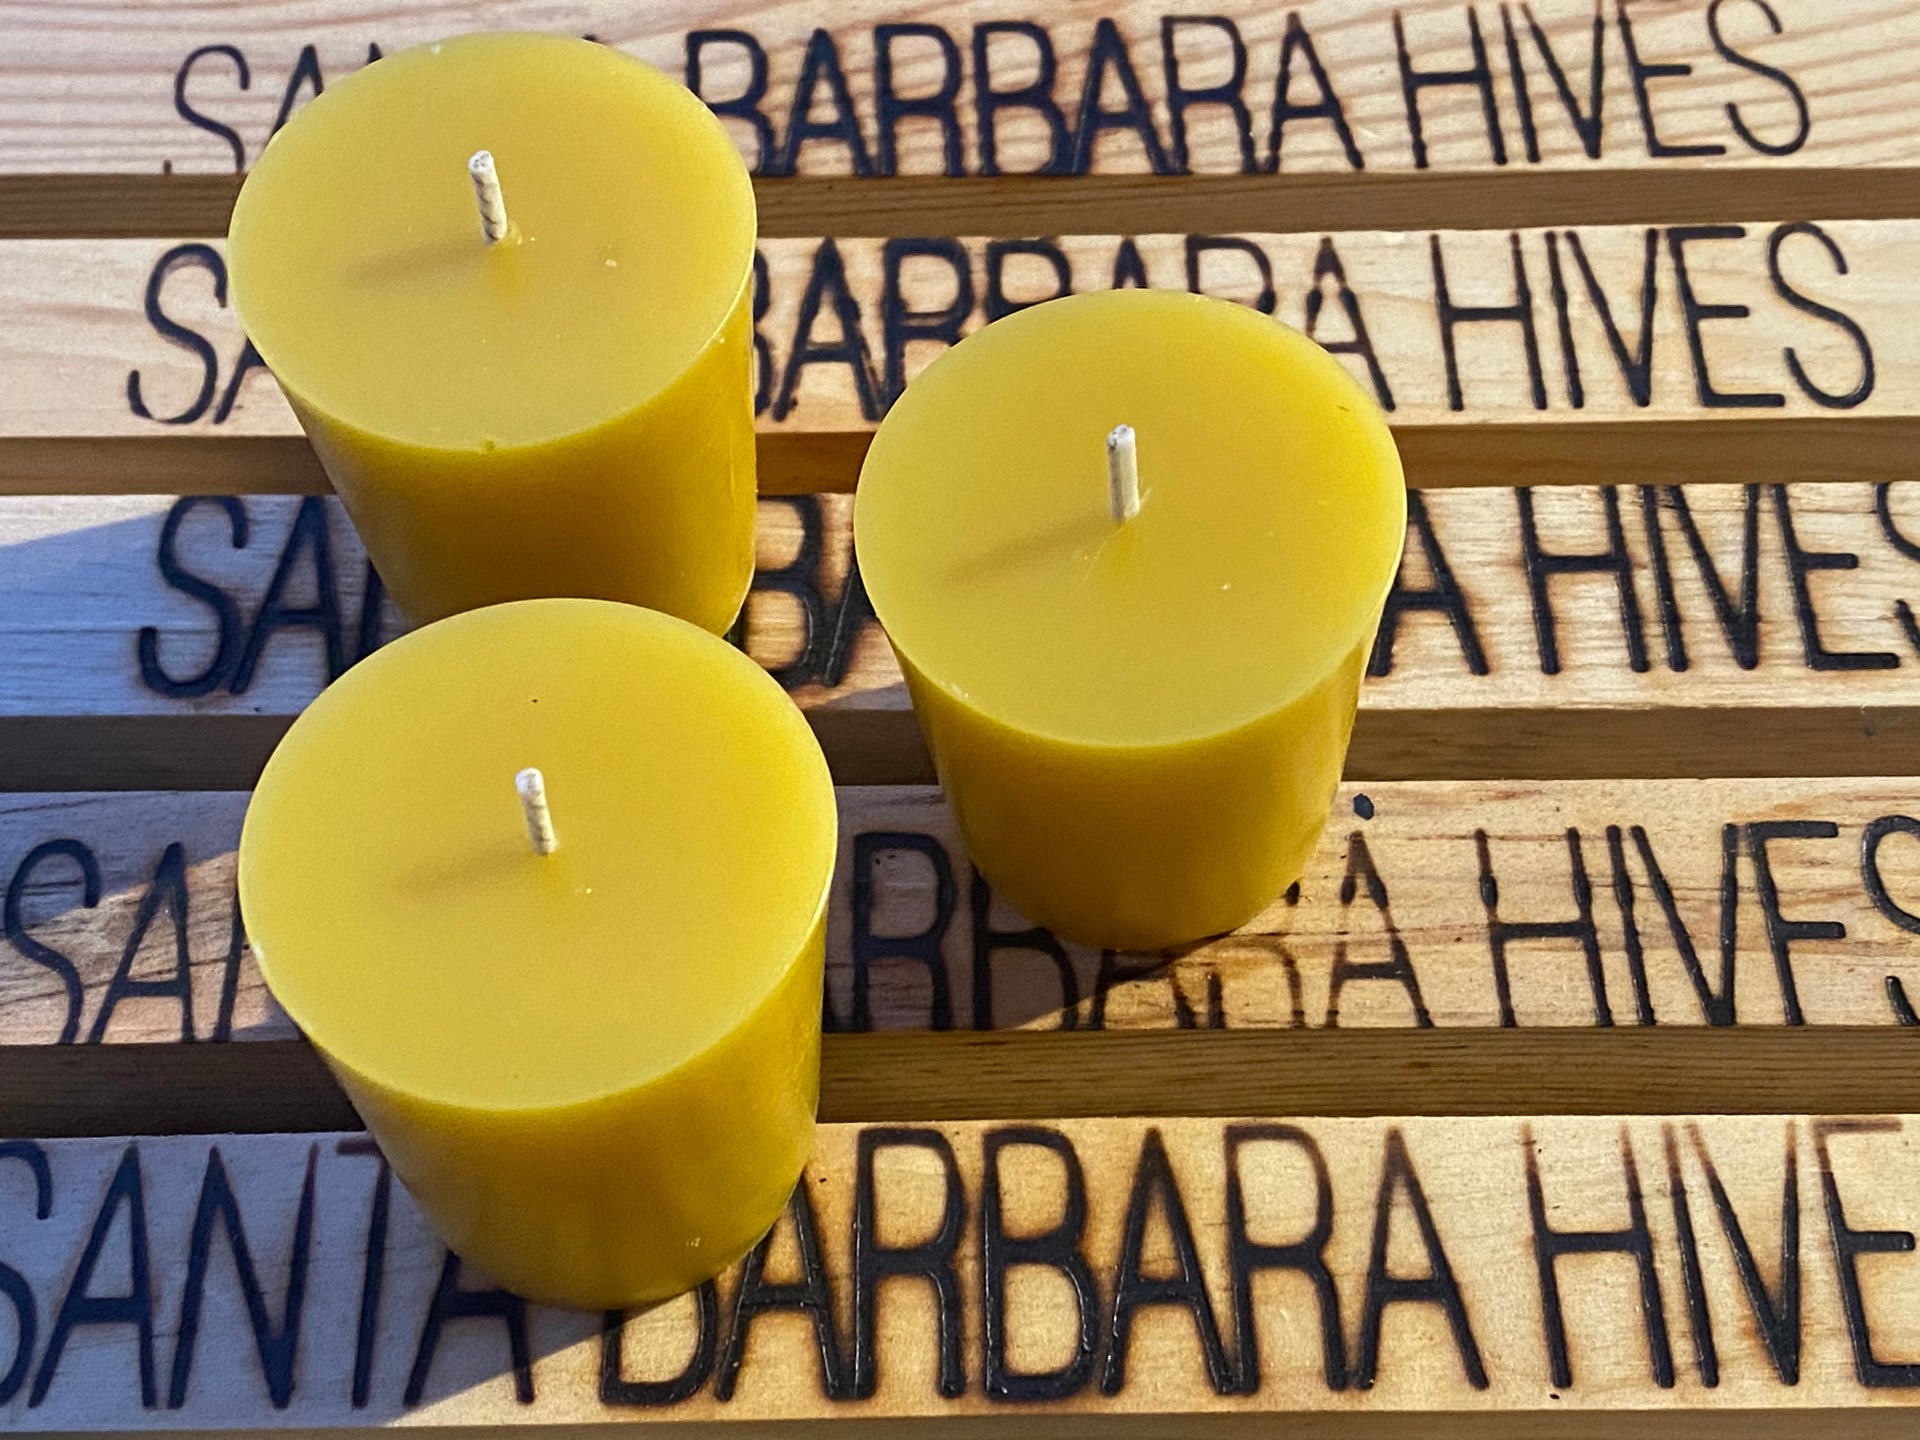 Pure Beeswax Candle in Beehive Glass